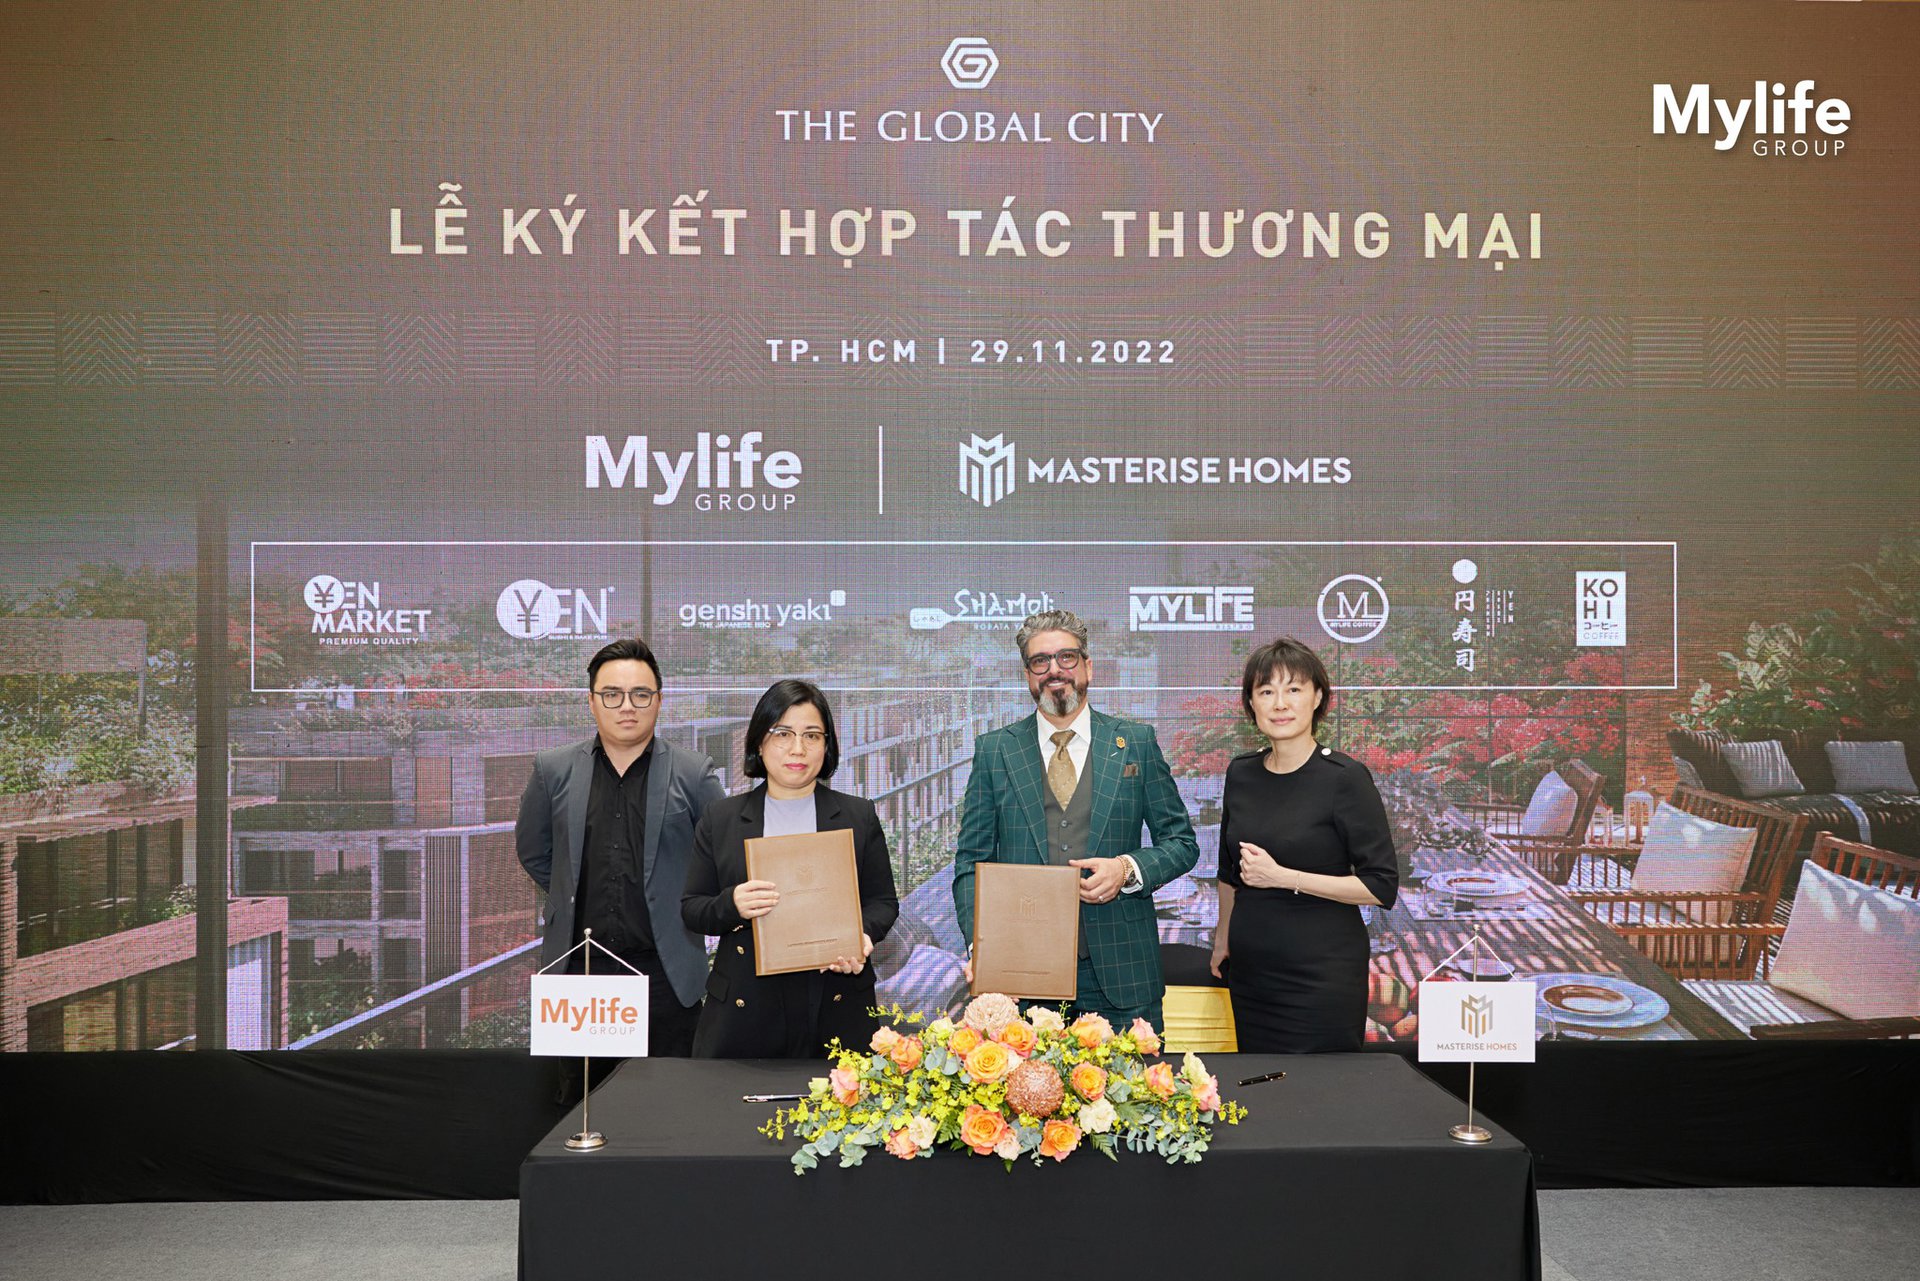 TRADE COOPERATION SIGN BETWEEN MYLIFE GROUP AND MASTERISE HOMES | MyLife Group